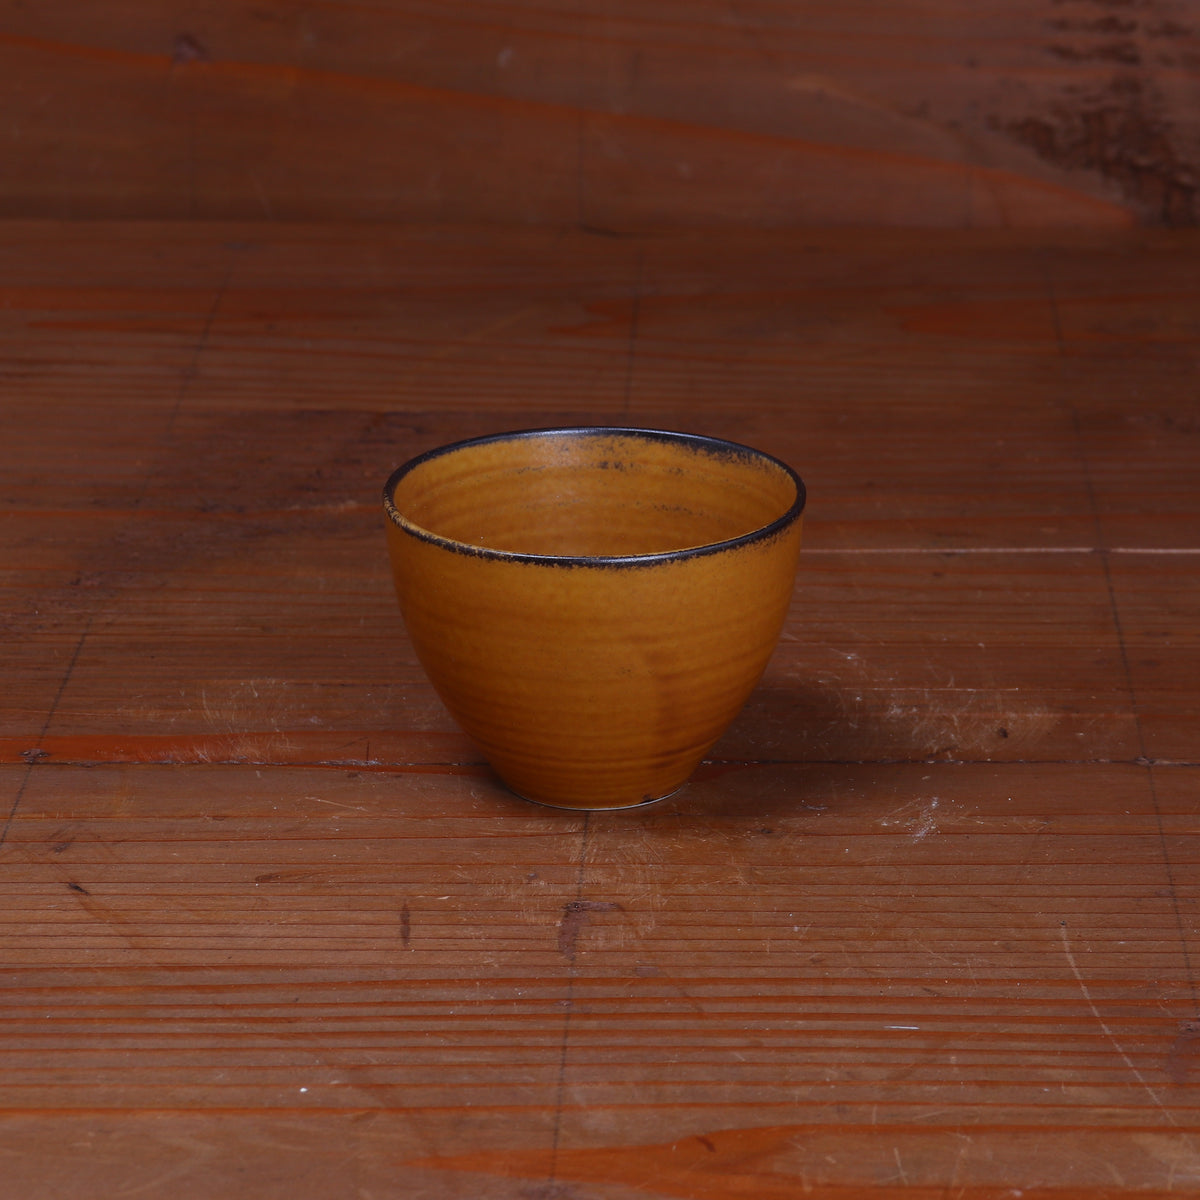 Cotto Tea Cup - Chestnut Yellow